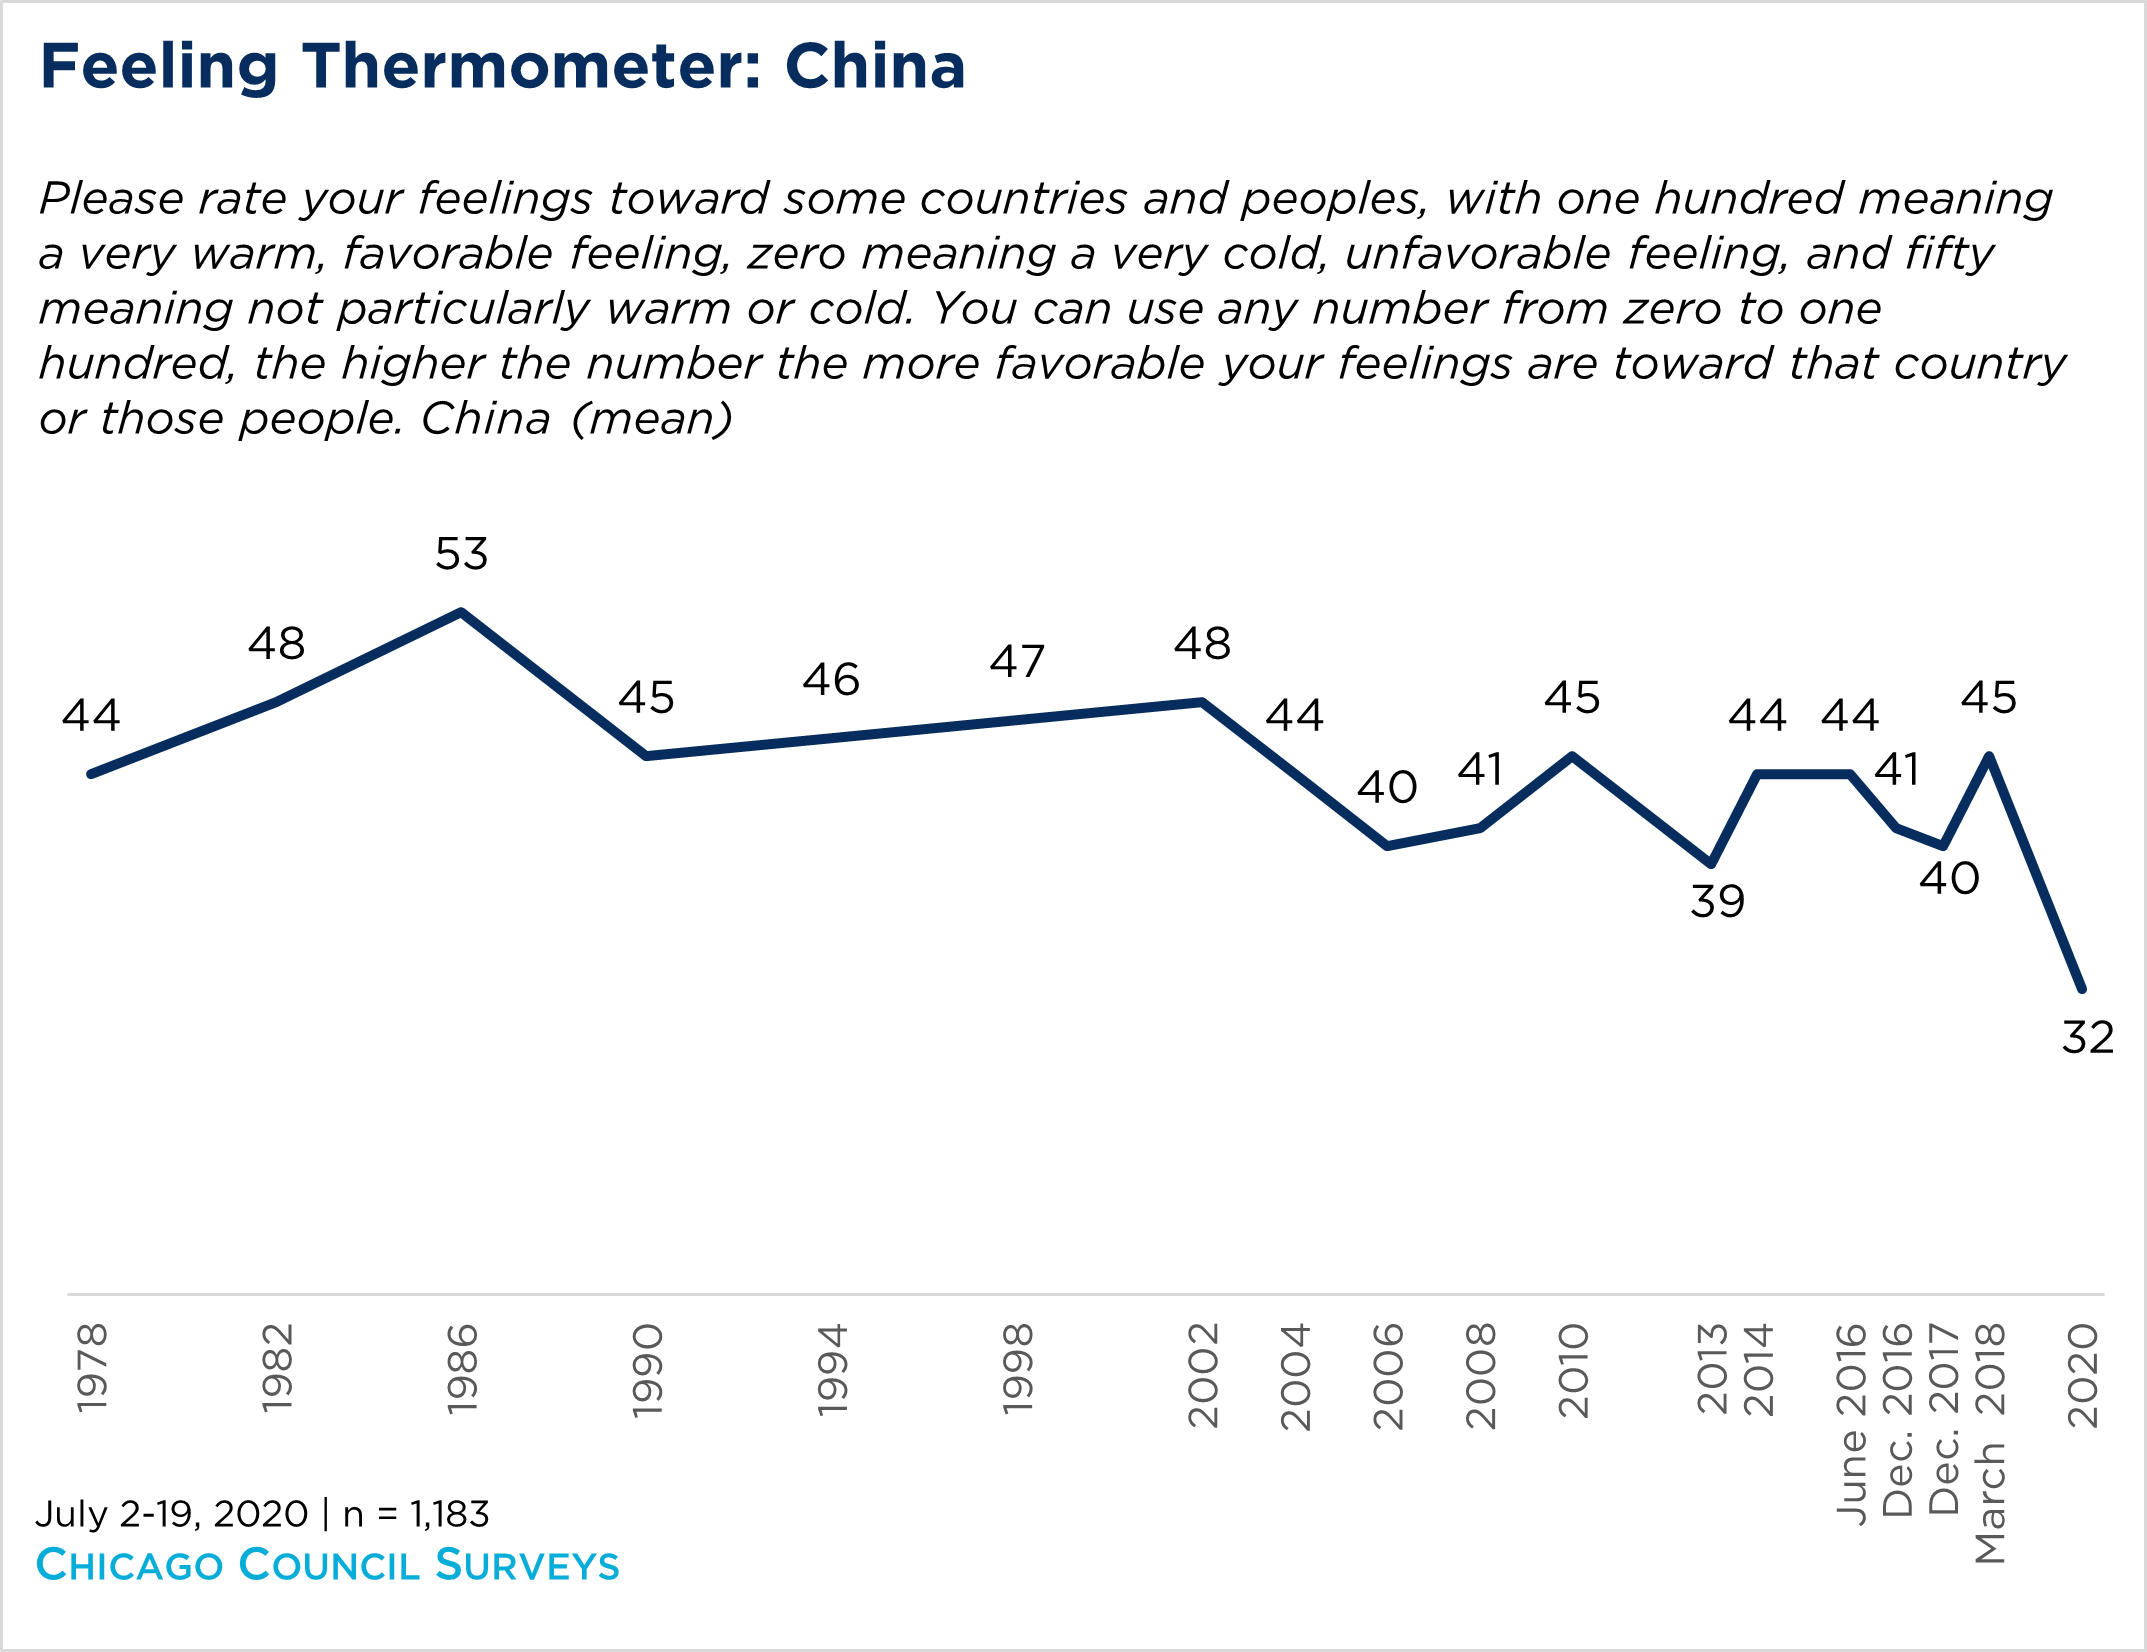 Chart showing a feeling thermometer of Americans toward China